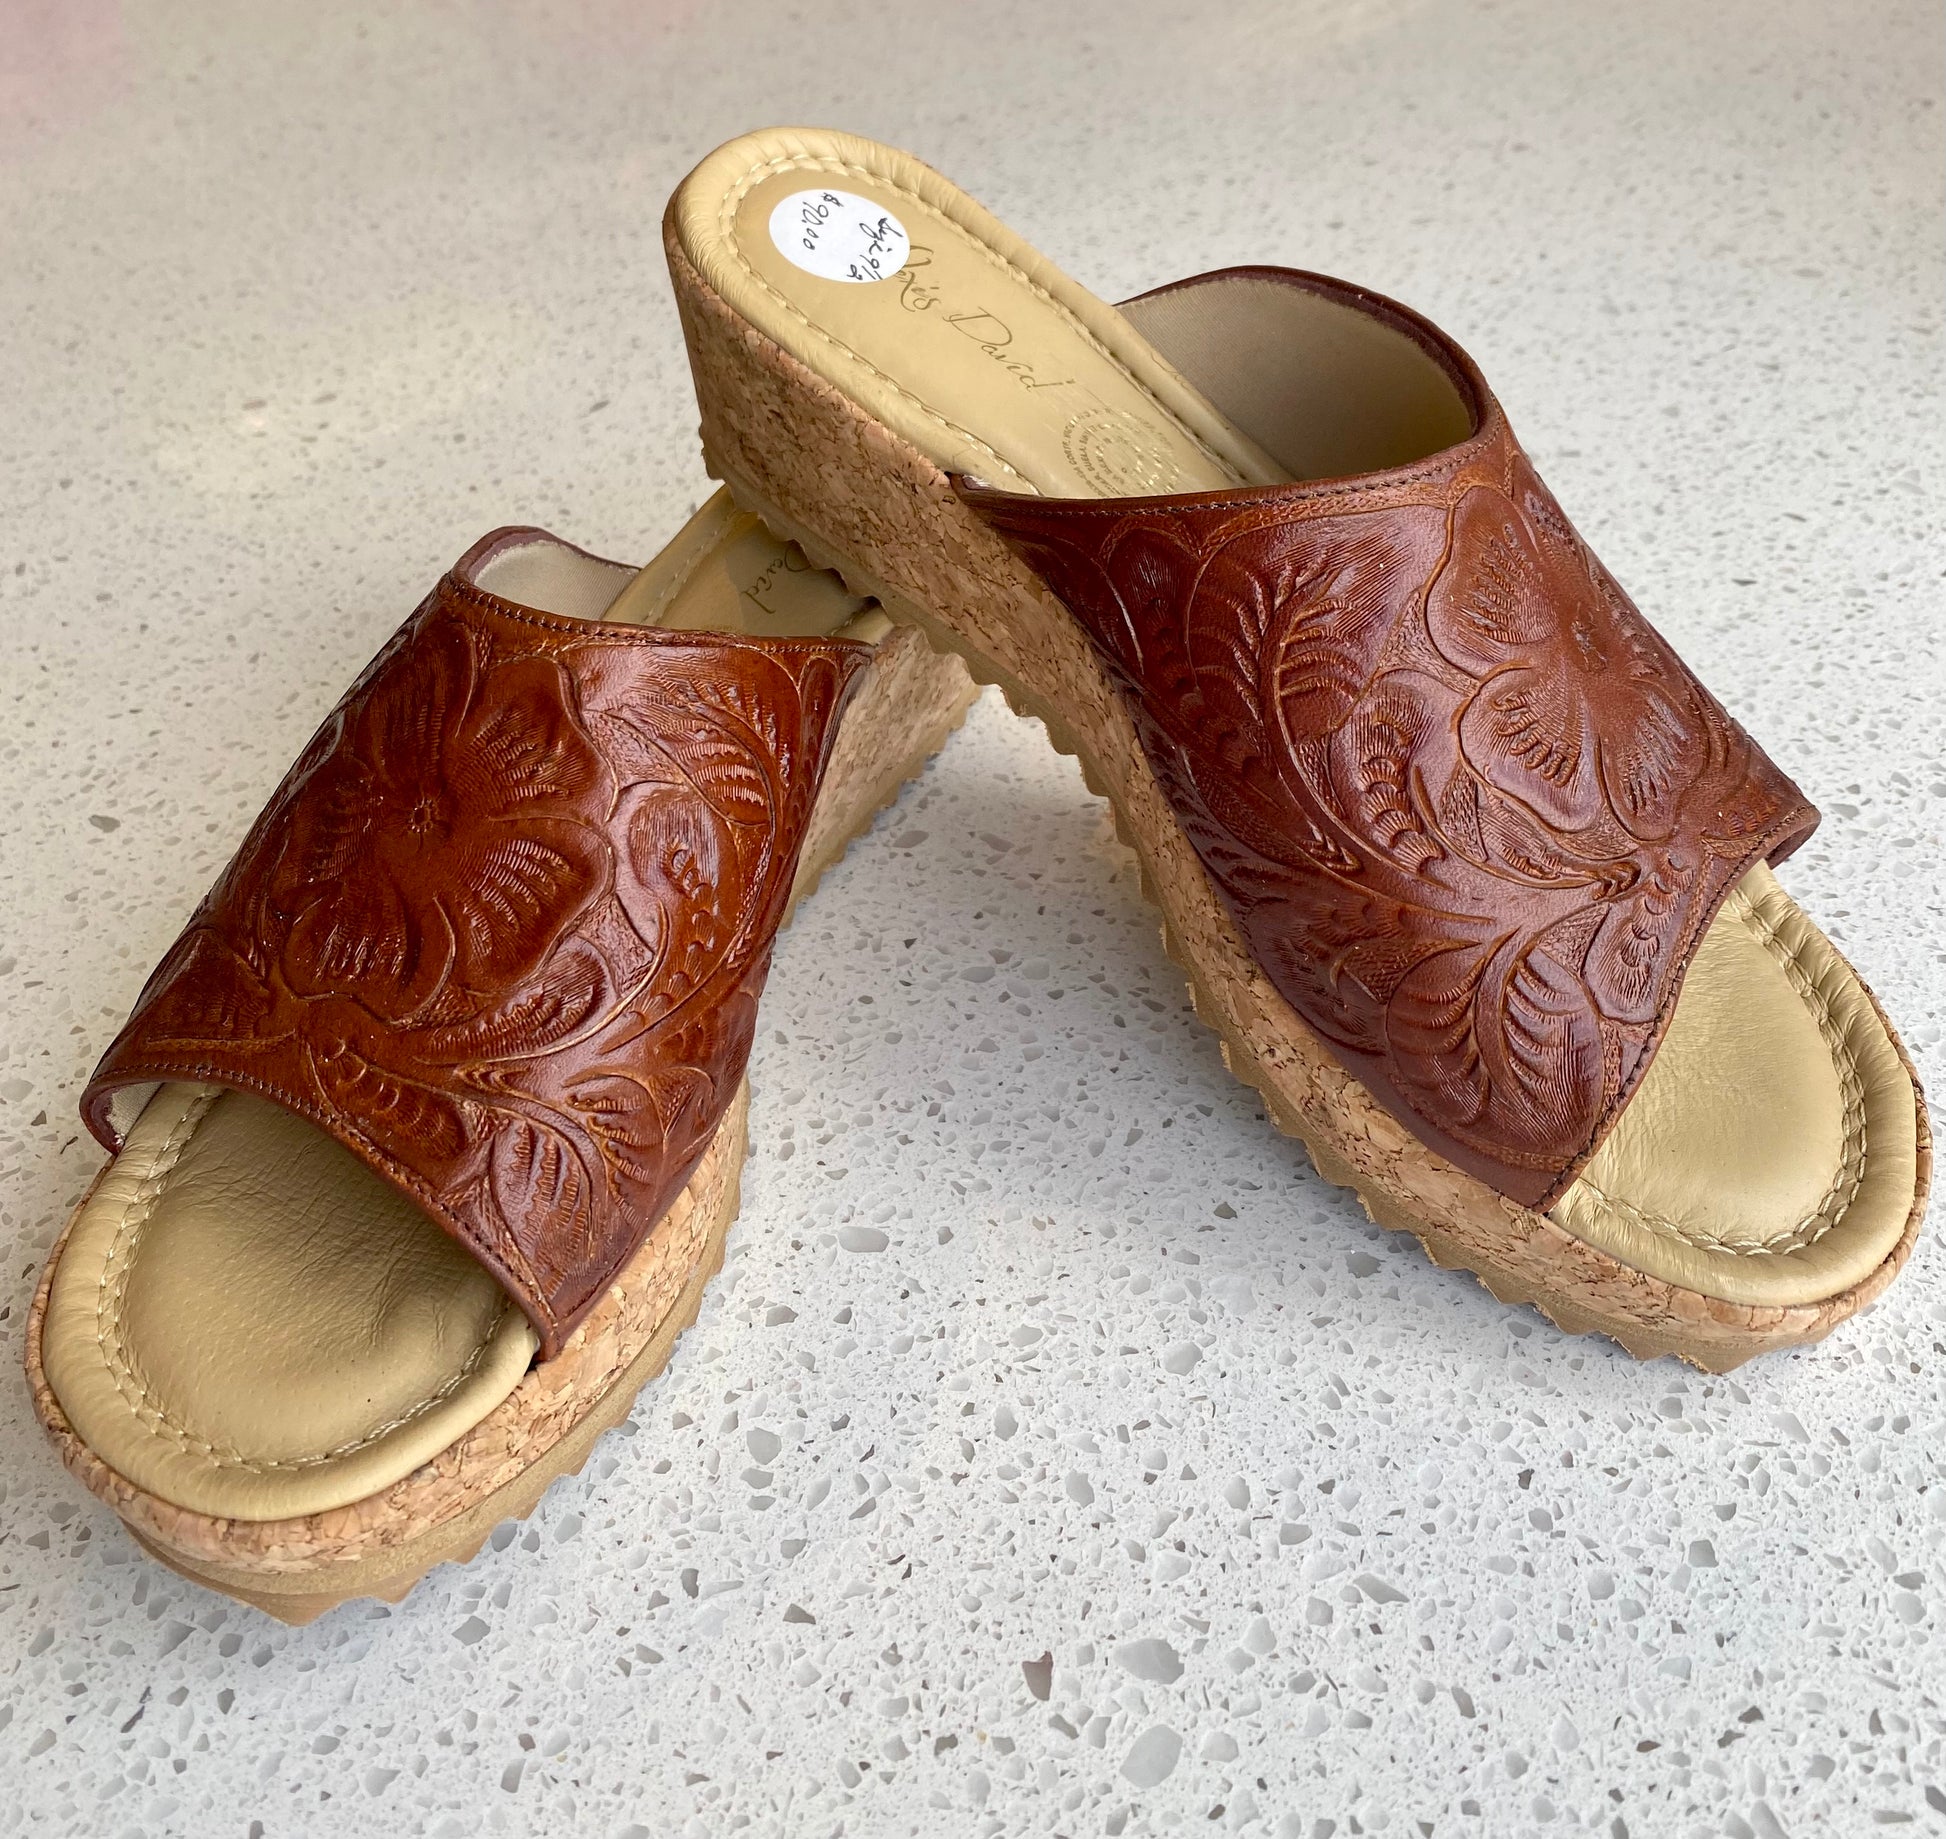 Hand-Tooled Leather 2” Cork Low Heel Heels Hide and Chic Camel  